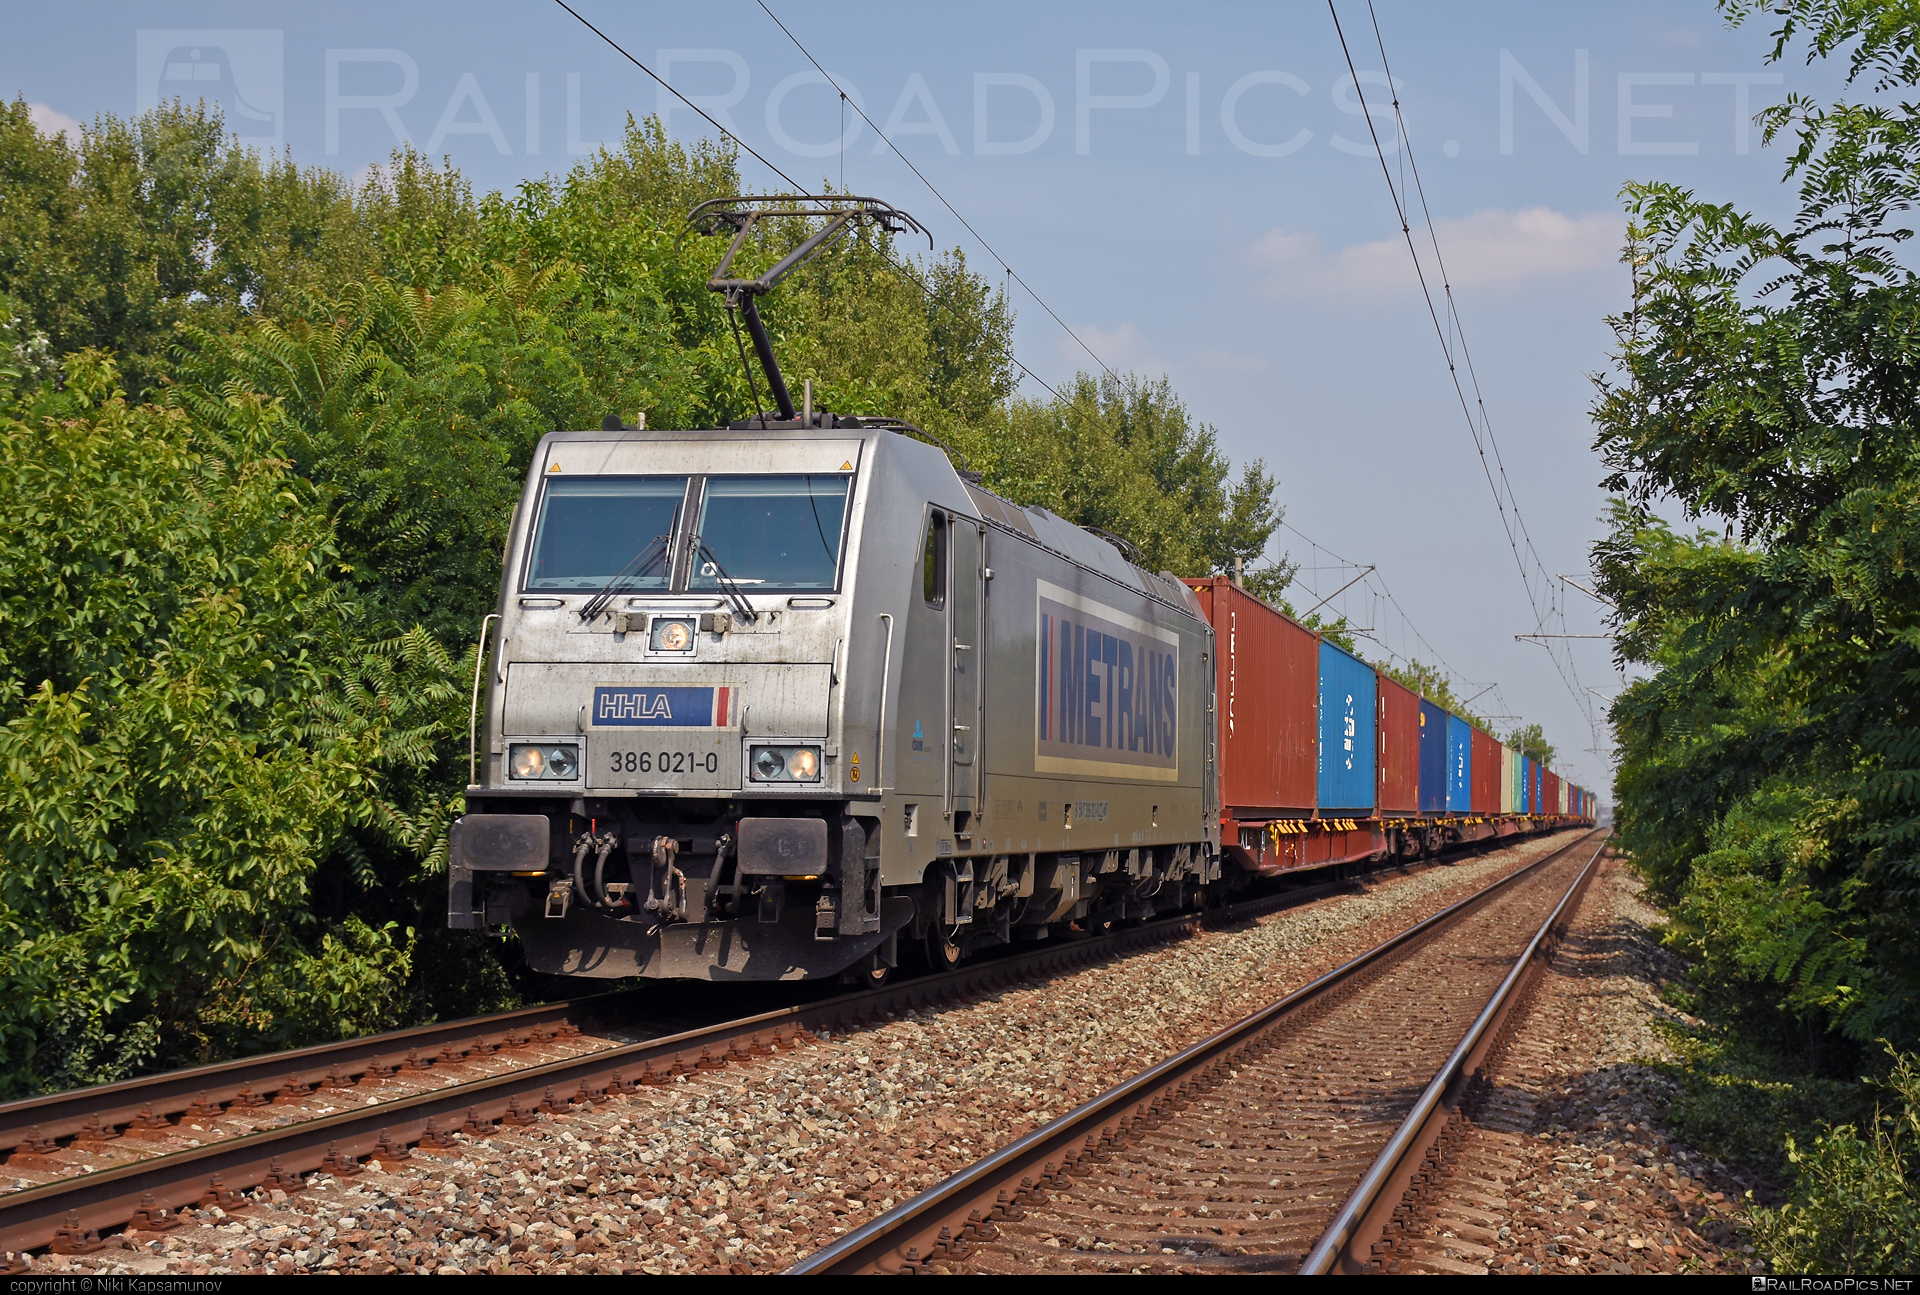 Bombardier TRAXX F140 MS - 386 021-0 operated by METRANS Rail s.r.o. #bombardier #bombardiertraxx #flatwagon #hhla #metrans #metransrail #traxx #traxxf140 #traxxf140ms